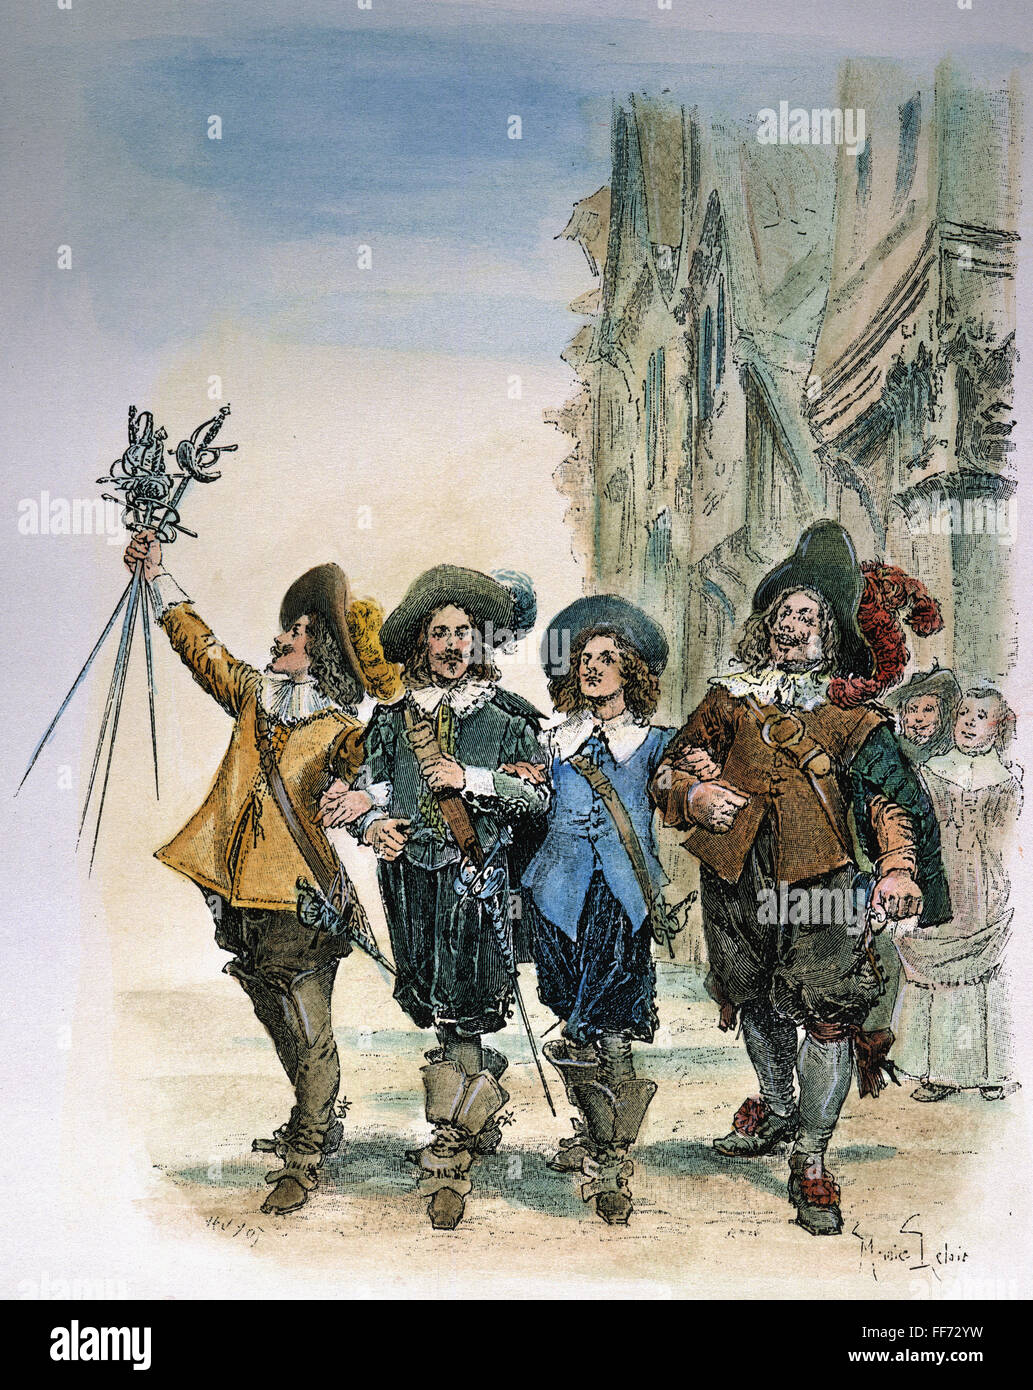 THREE MUSKETEERS. /nD'Artagnan, Athos, Aramis, and Porthos: illustration from a late 19th c. edition, by Alexander Dumas pere. Stock Photo